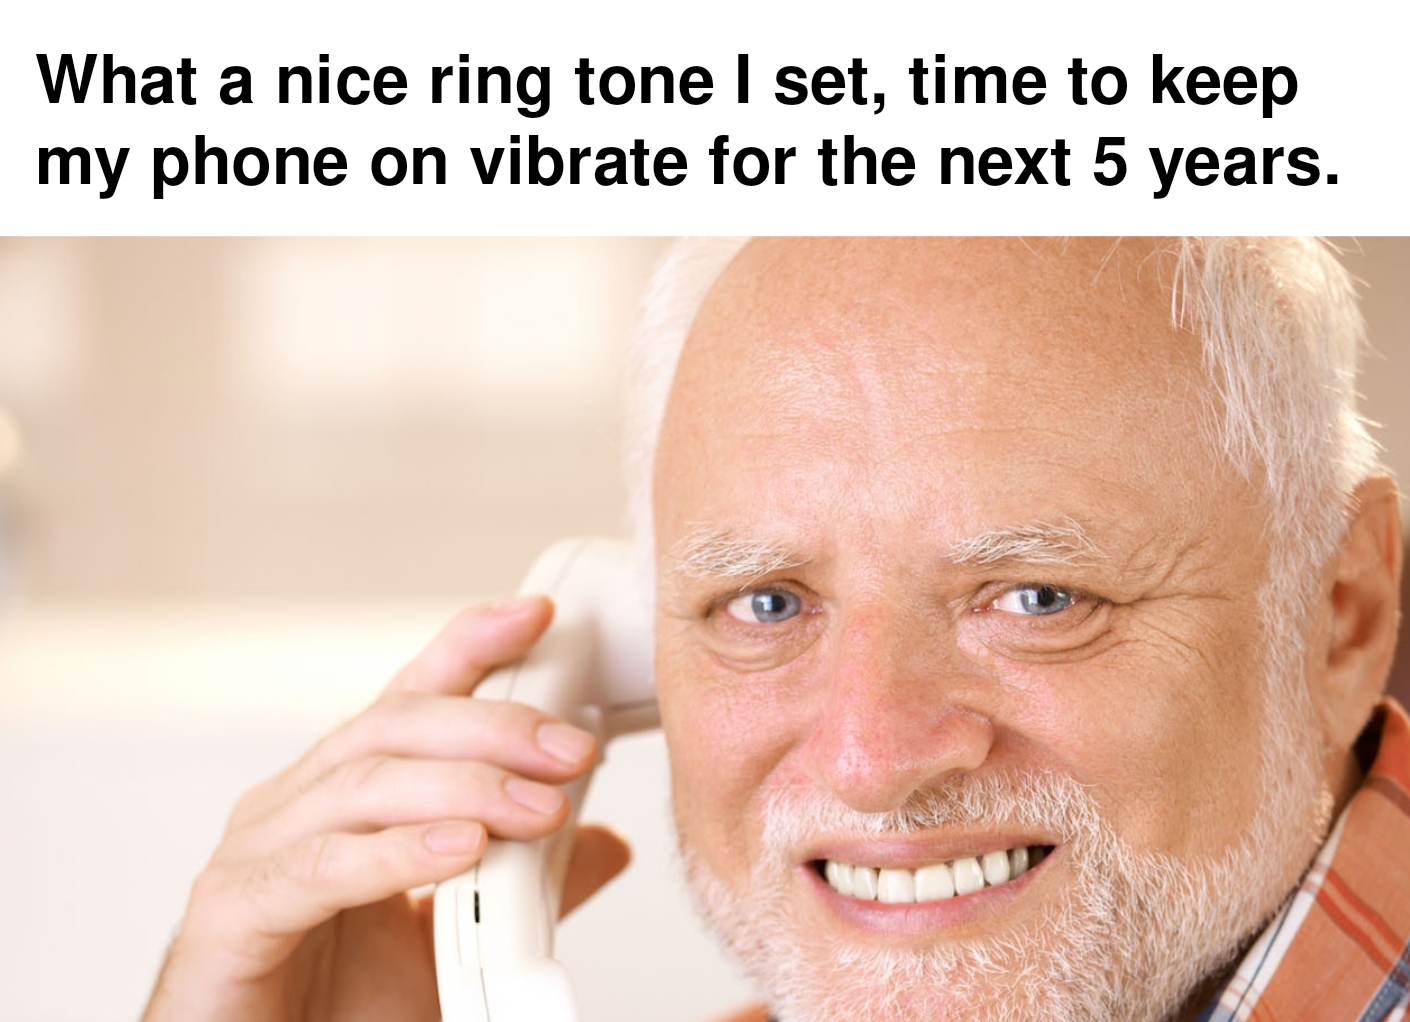 funny pics and memes - love my iphone - What a nice ring tone I set, time to keep my phone on vibrate for the next 5 years.